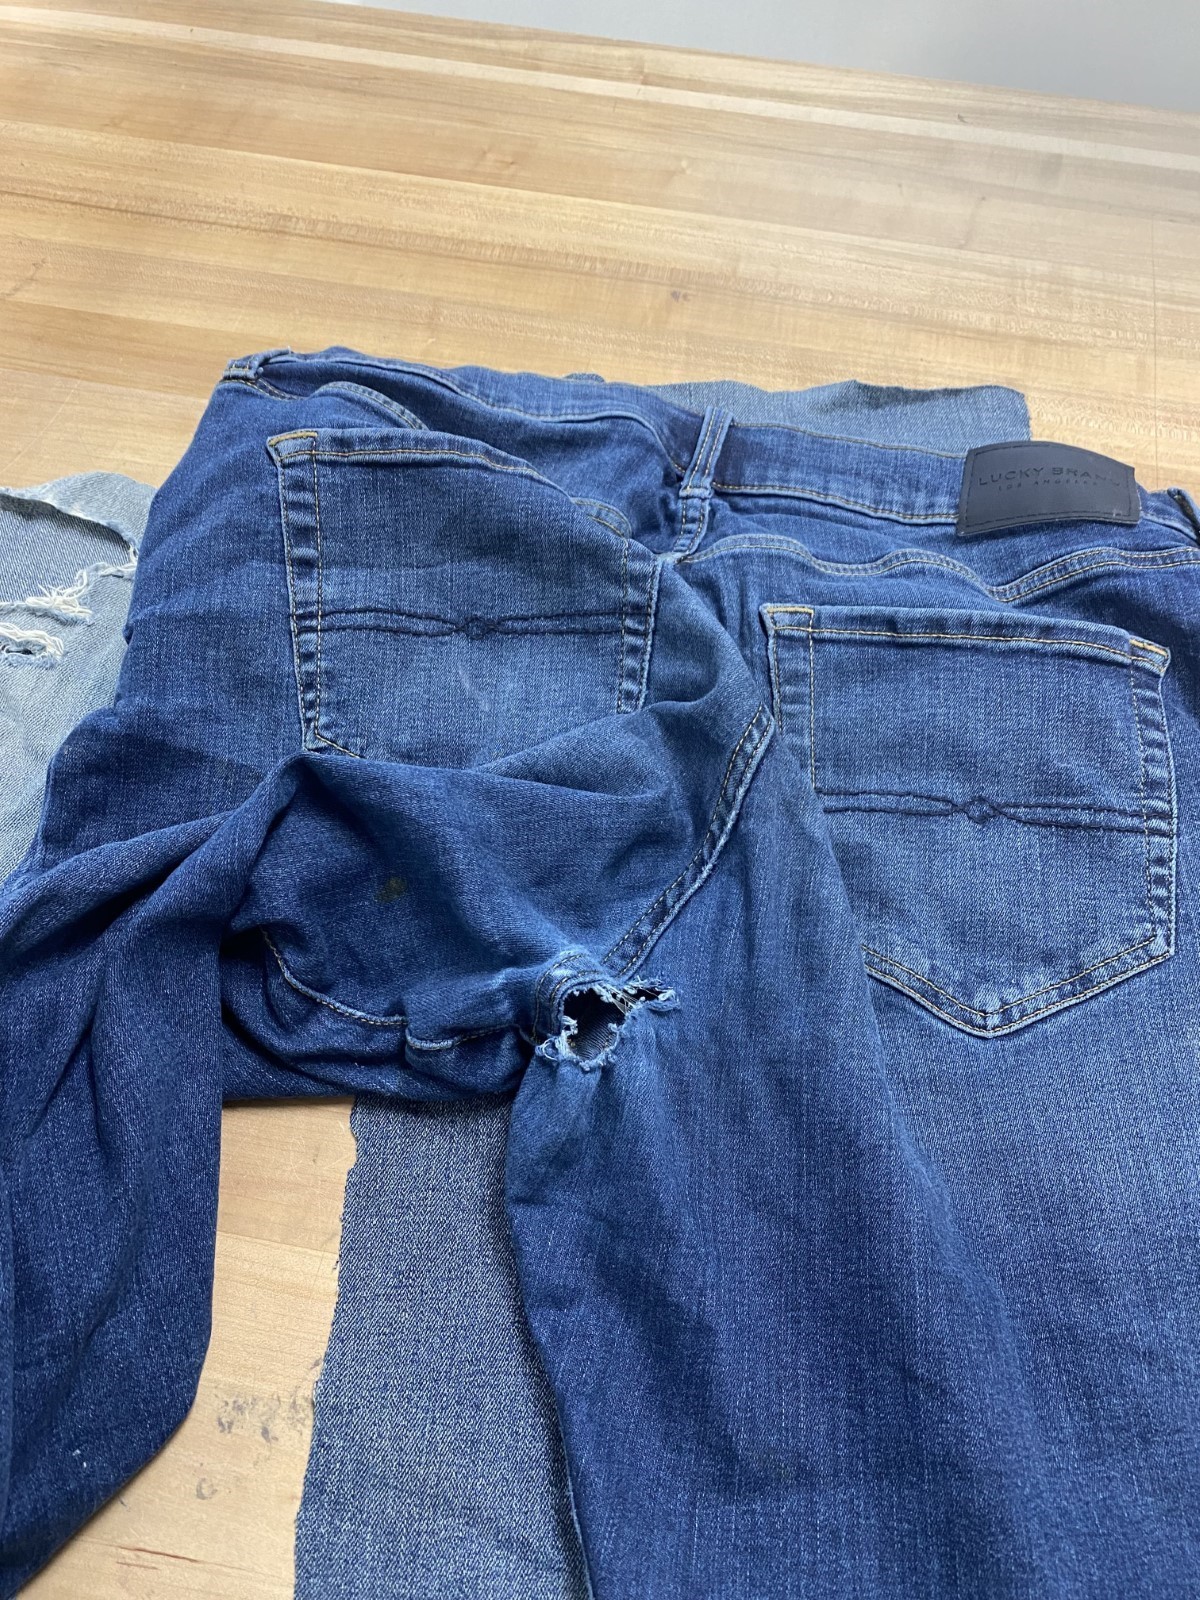 Another pair of blue jeans with a hole near the rear center seam.